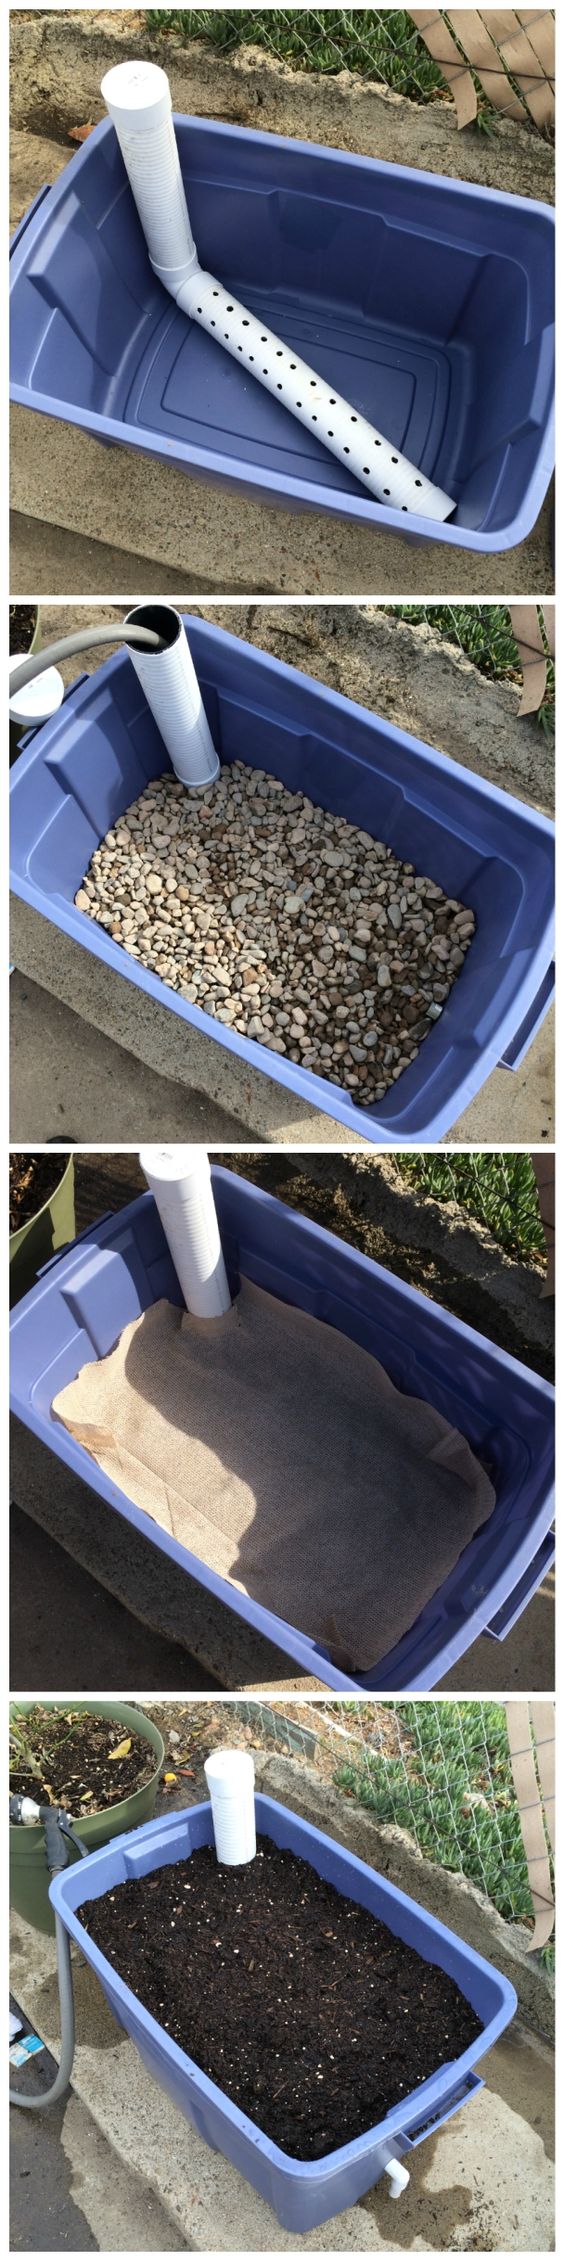 DIY Wicking Bed Container Gardening. This is a great idea to ensure less and adequate water for your plants.